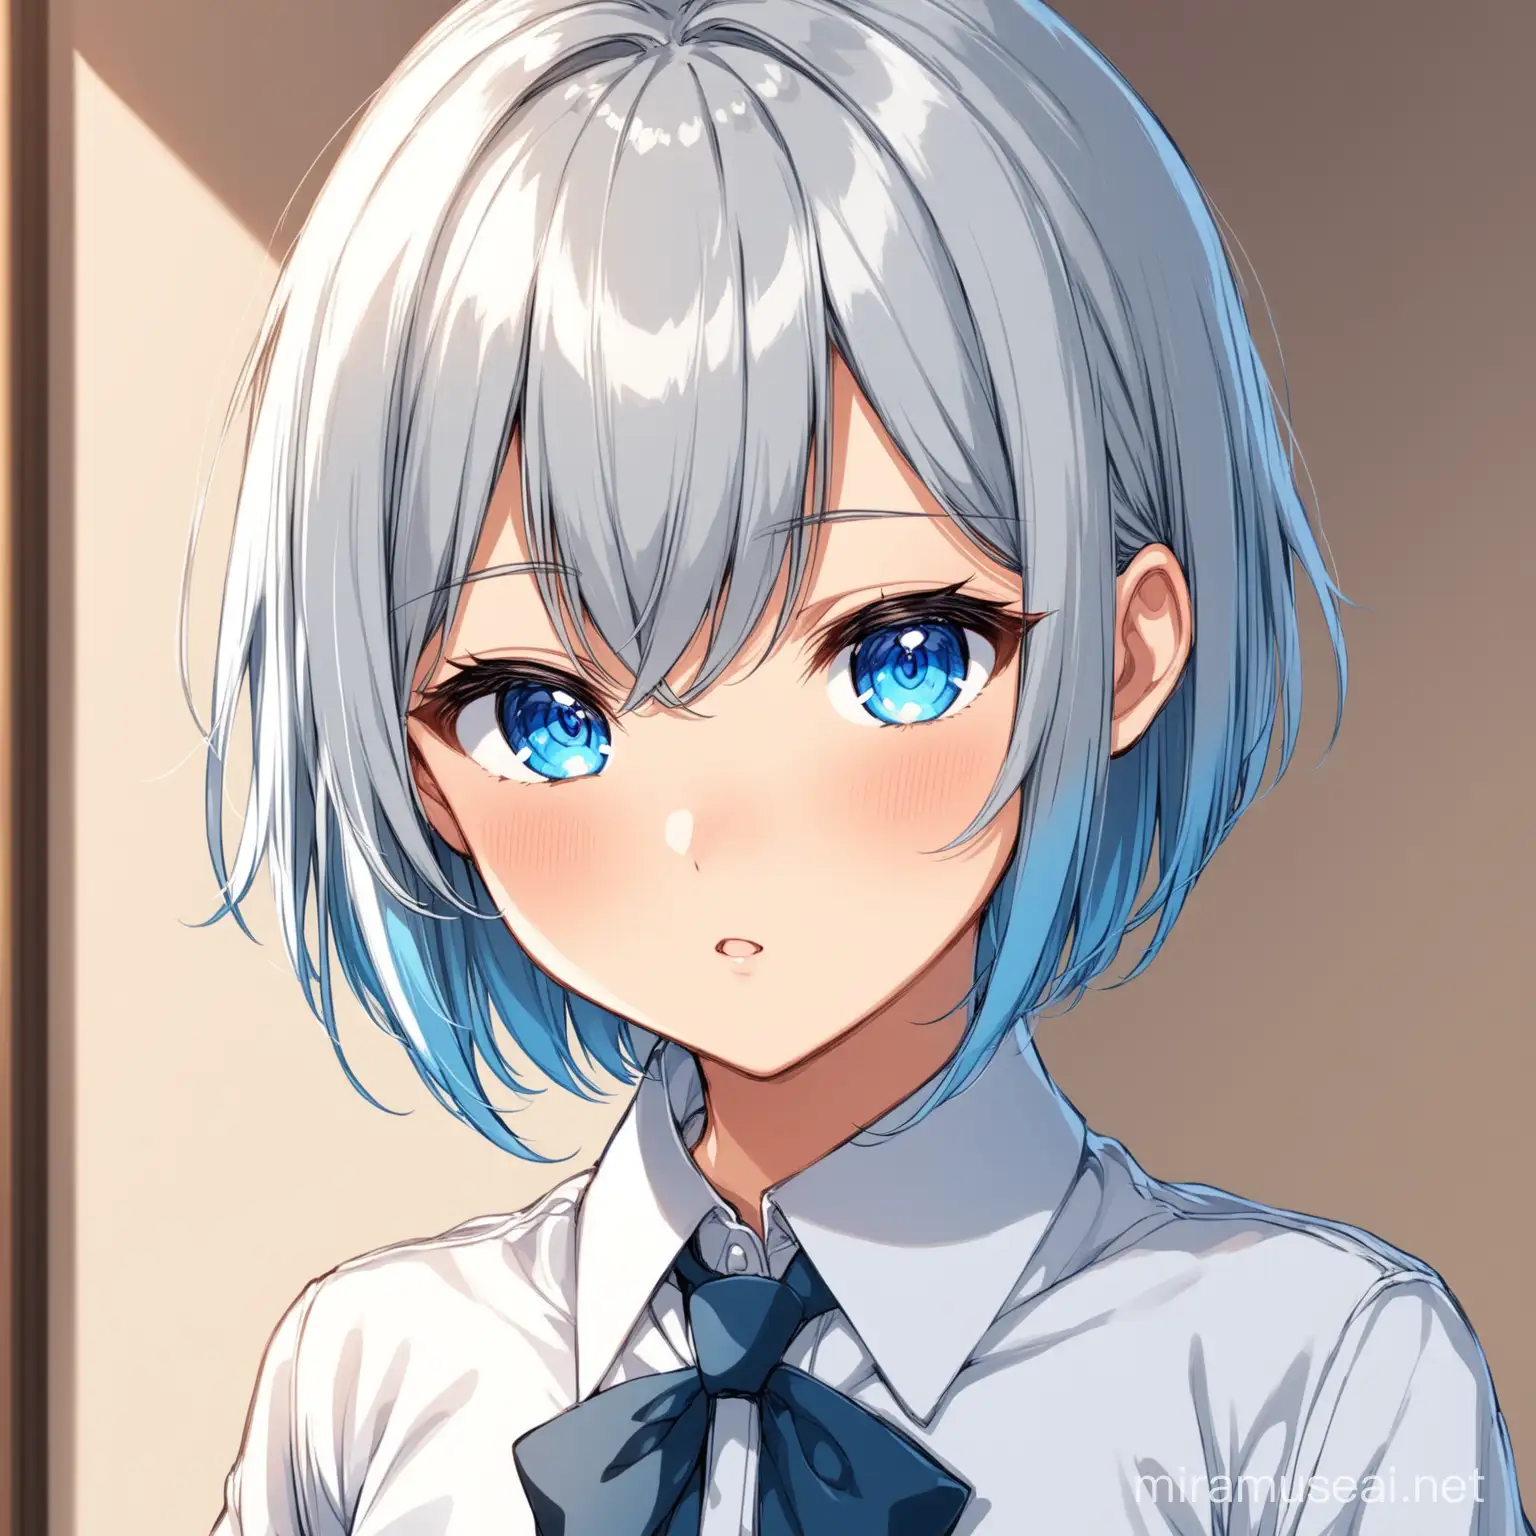 anime femboy silver short hair and blue eyes,with a school dress